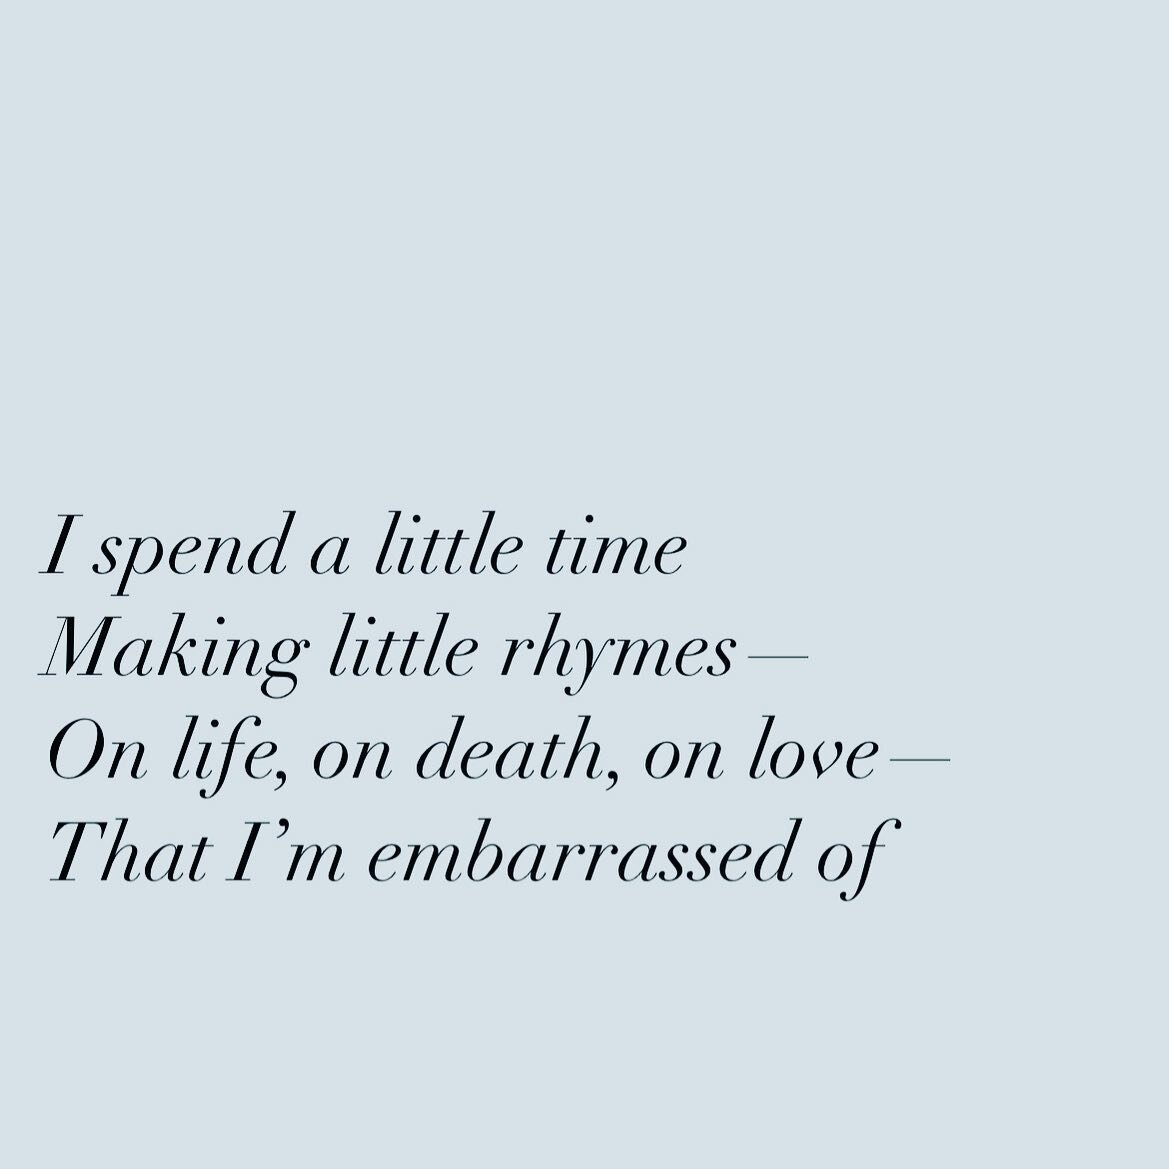 A little time

#poetry #poetsofinstagram #writer #writersofinstagram #cynical #comedy #embarrassed